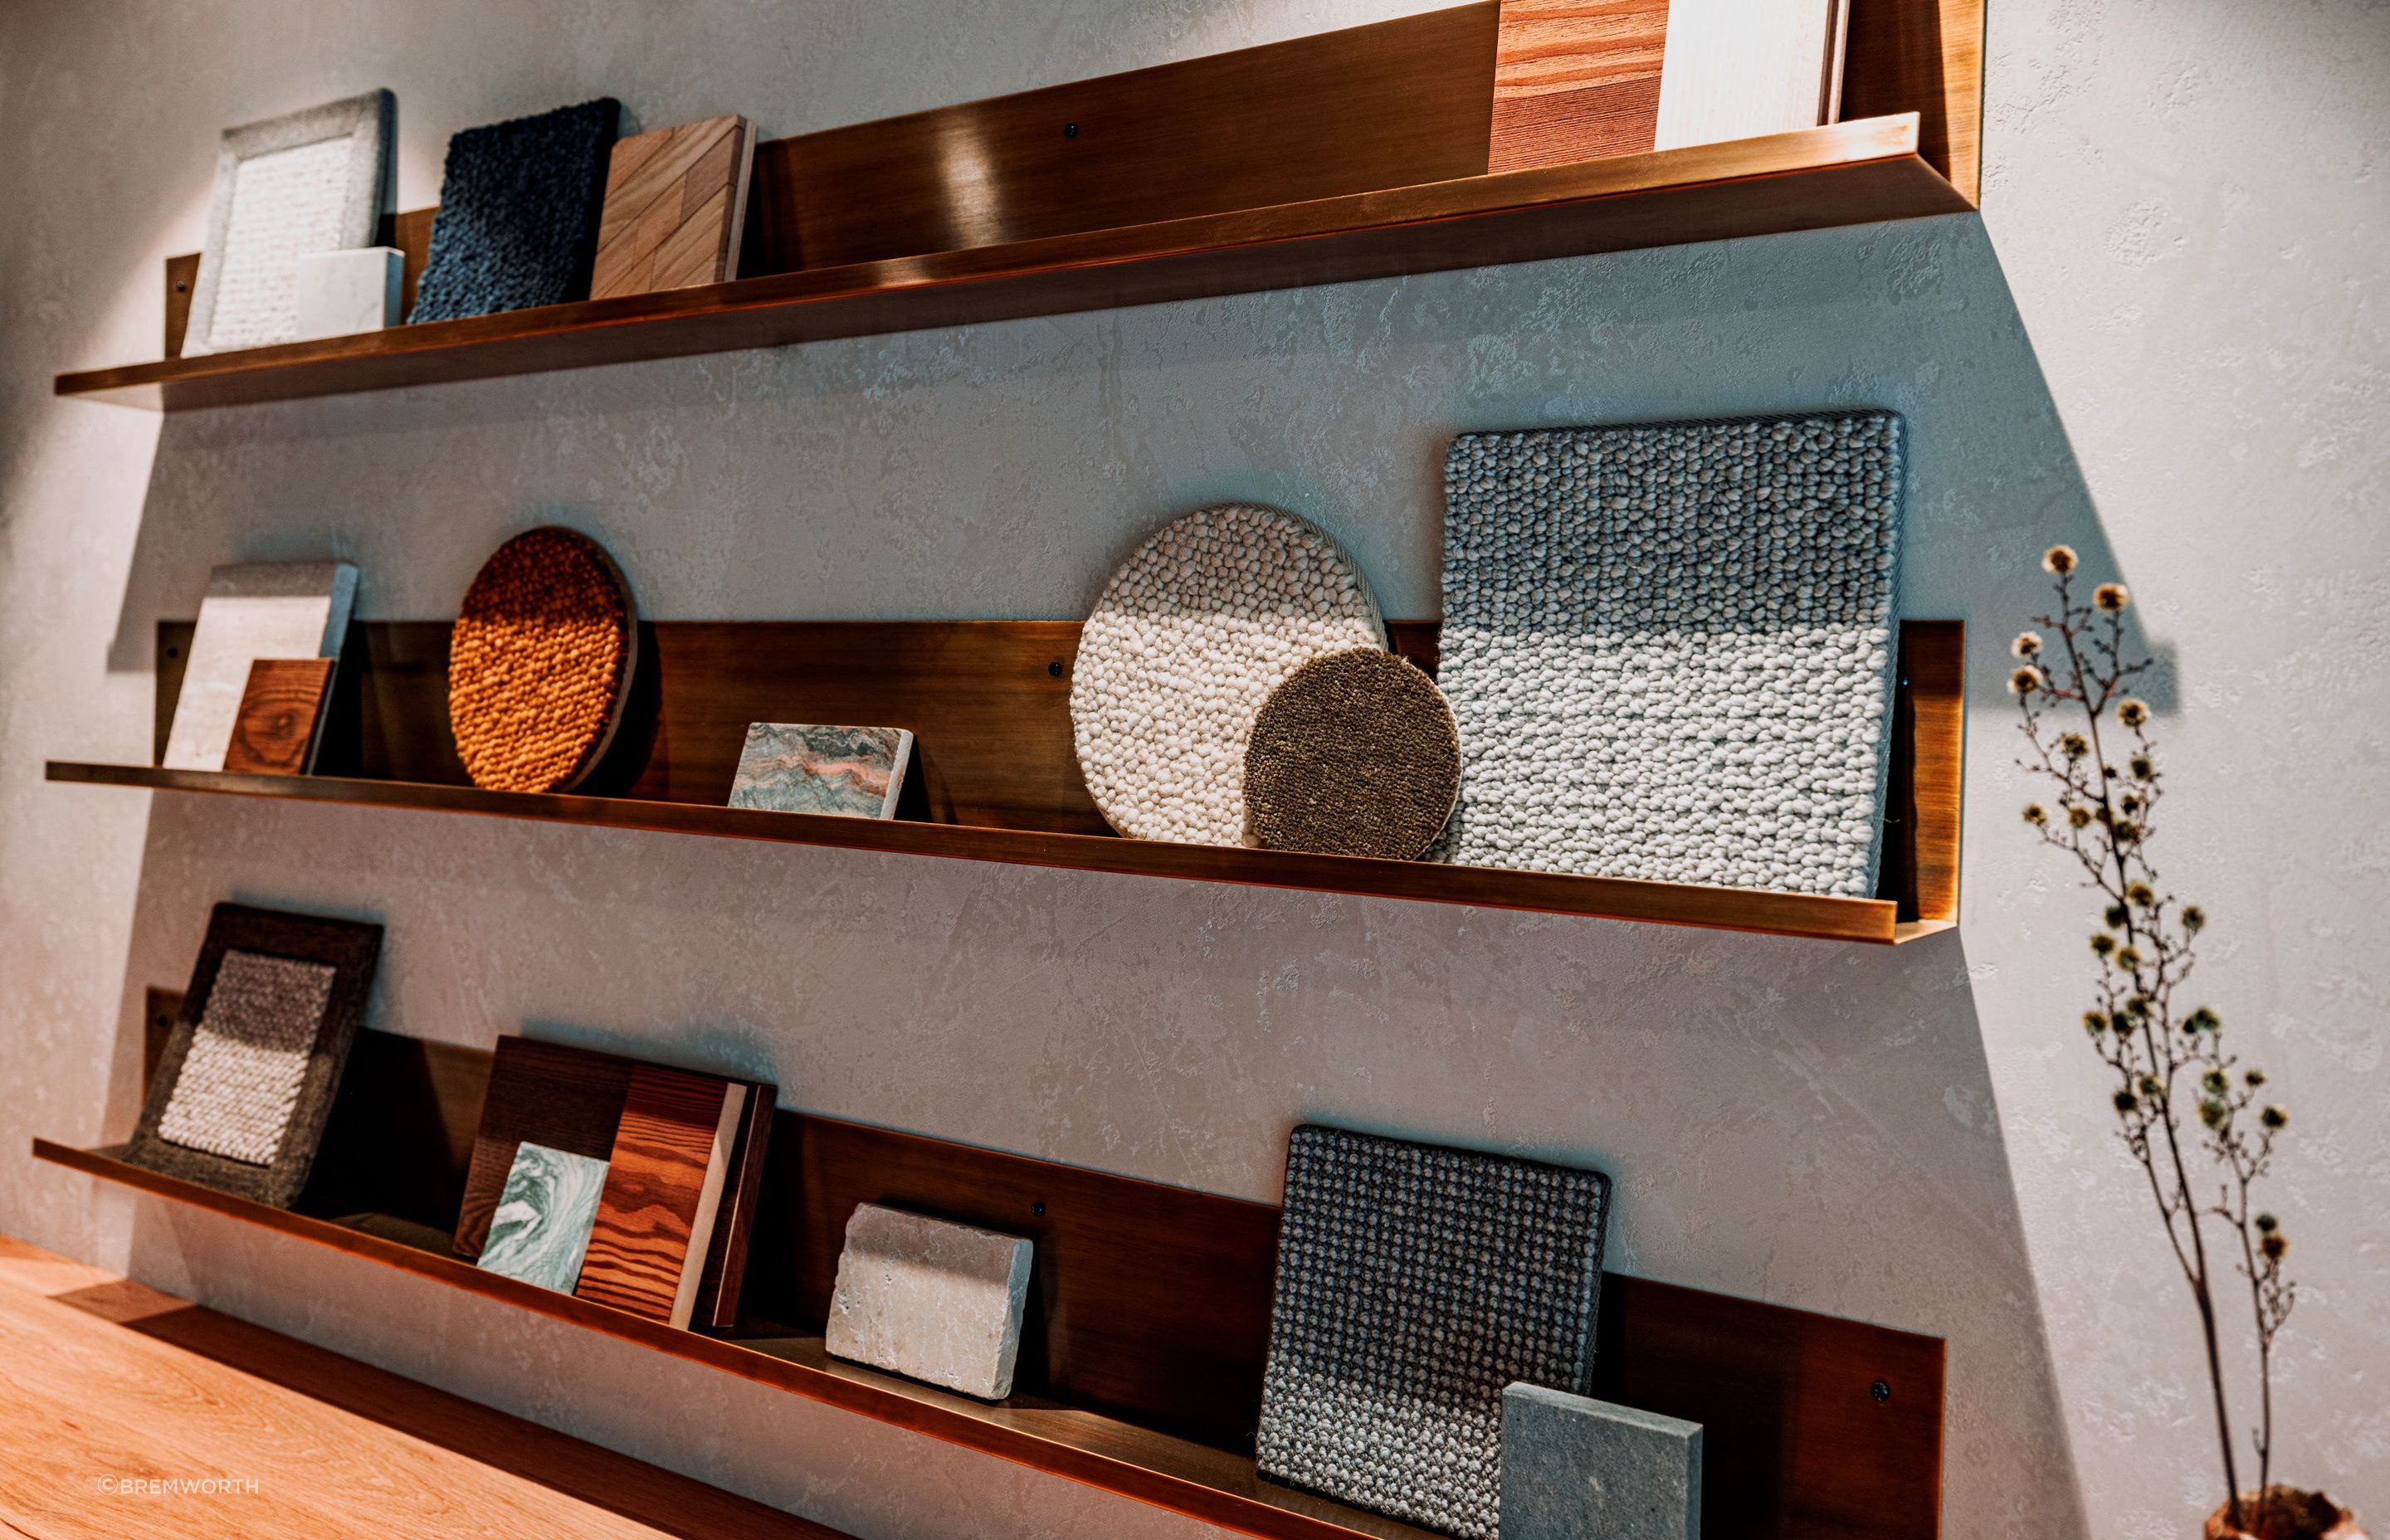 The store has a dedicated nook for rug design, with a selection of on-trend materials you can use as inspiration.